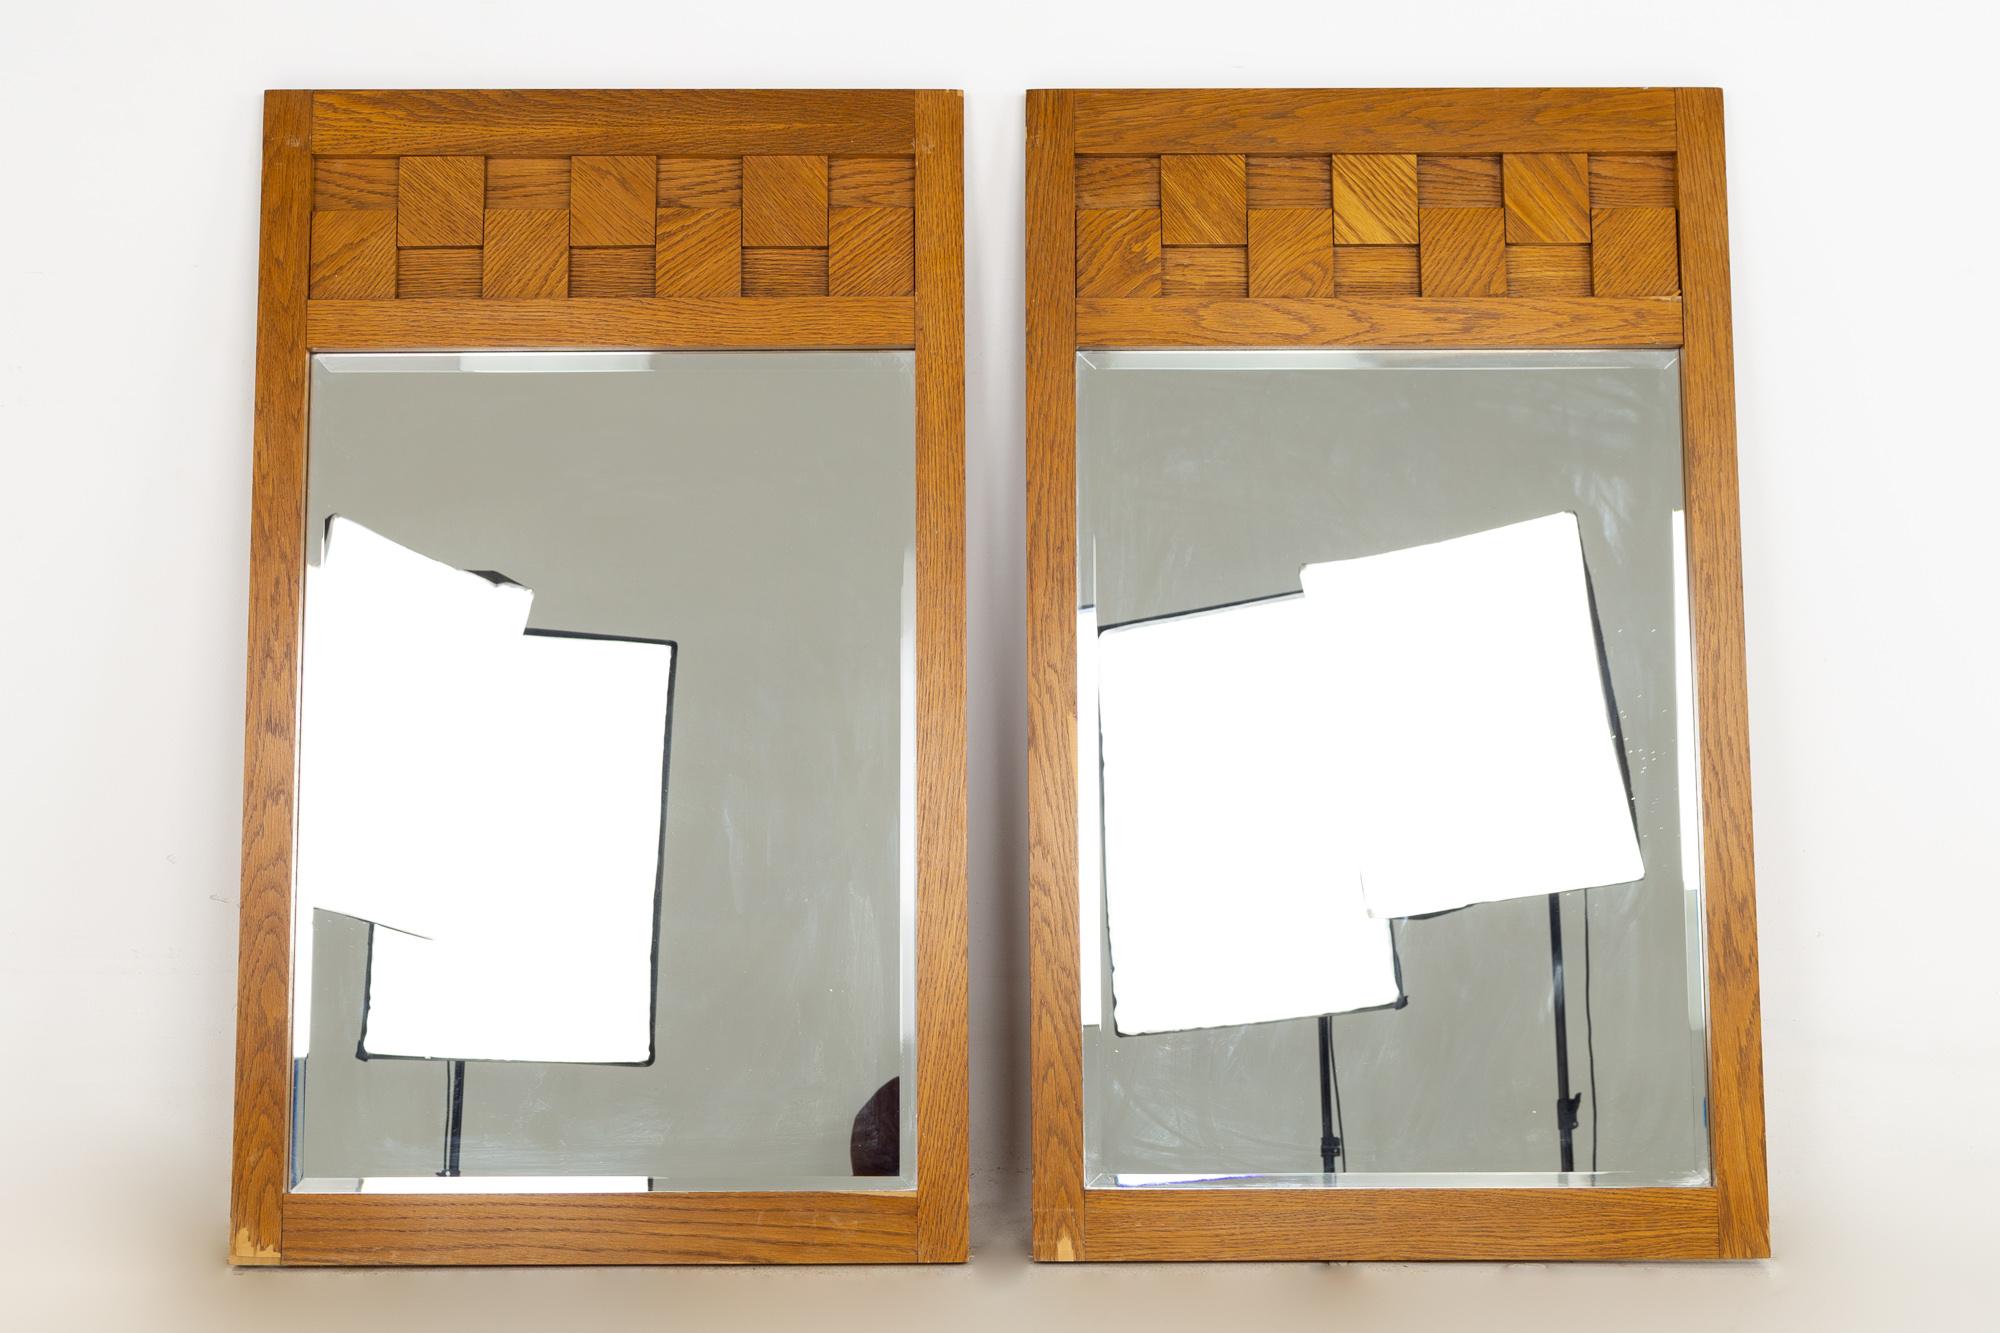 Lane Brutalist mid century oak mirror - set

These mirrors measures: 28.5 wide x 1 deep x 47 inches high

?All pieces of furniture can be had in what we call restored vintage condition. That means the piece is restored upon purchase so it’s free